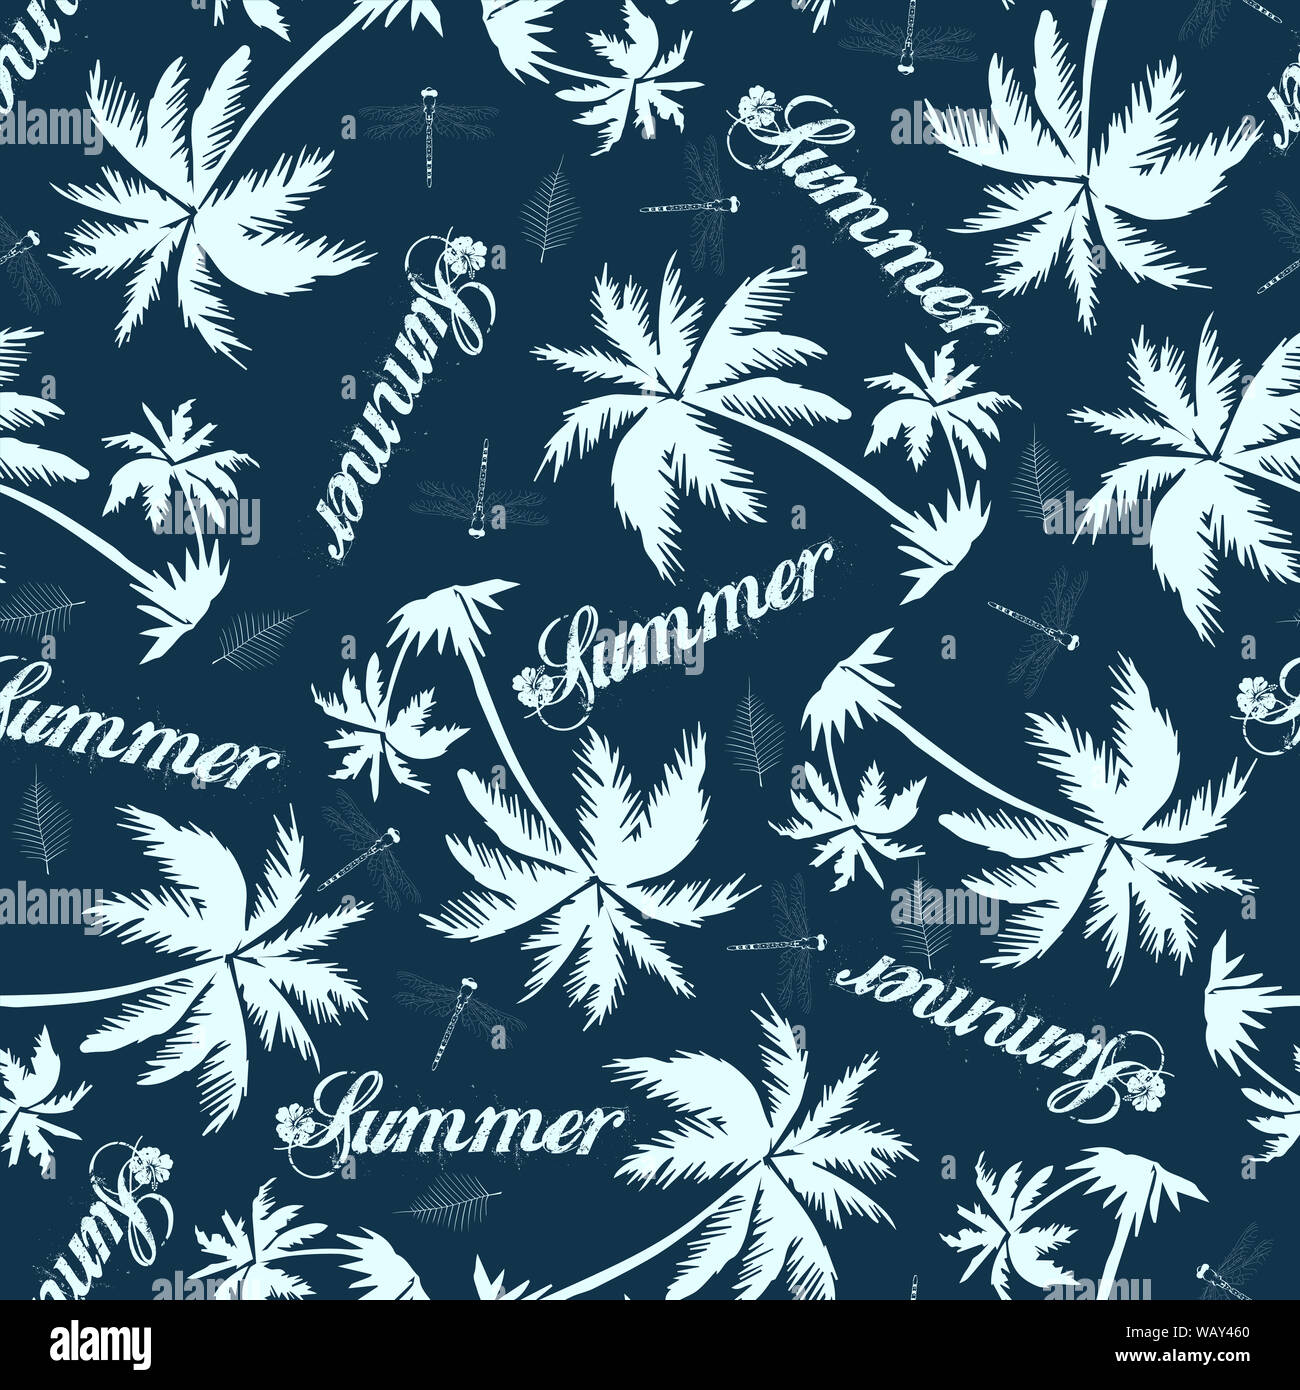 Summer seamless pattern, vector illustration with palm tree